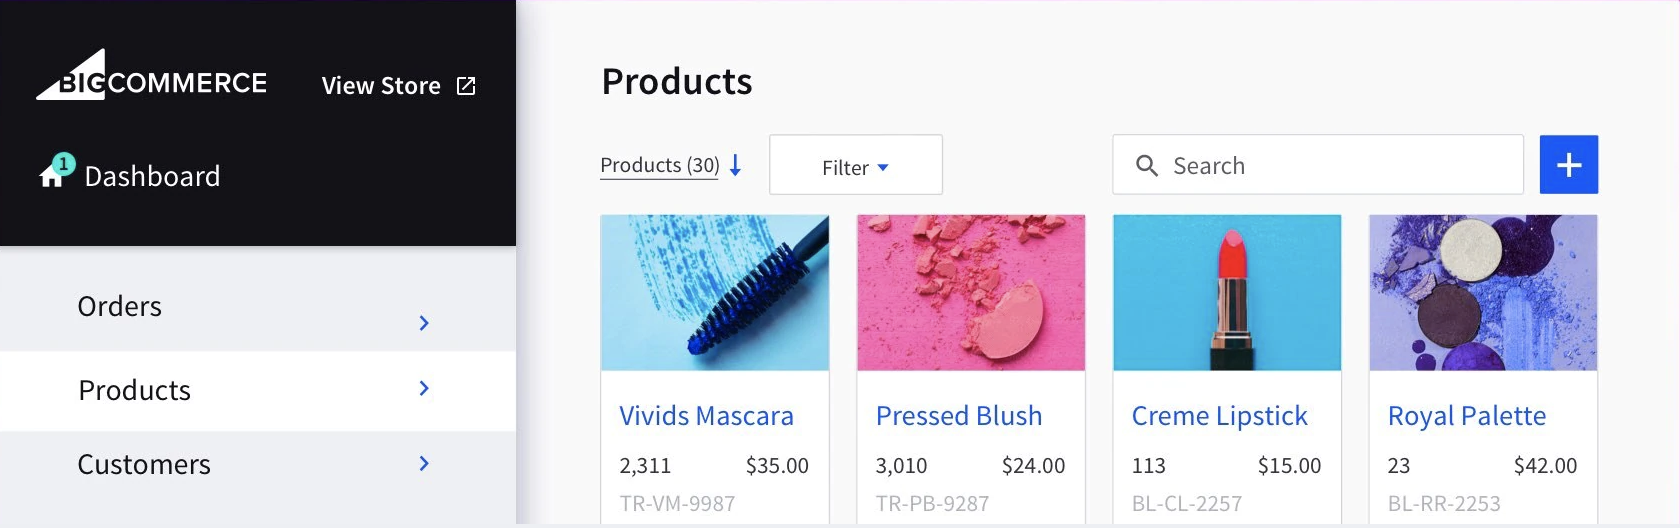 BigCommerce - products